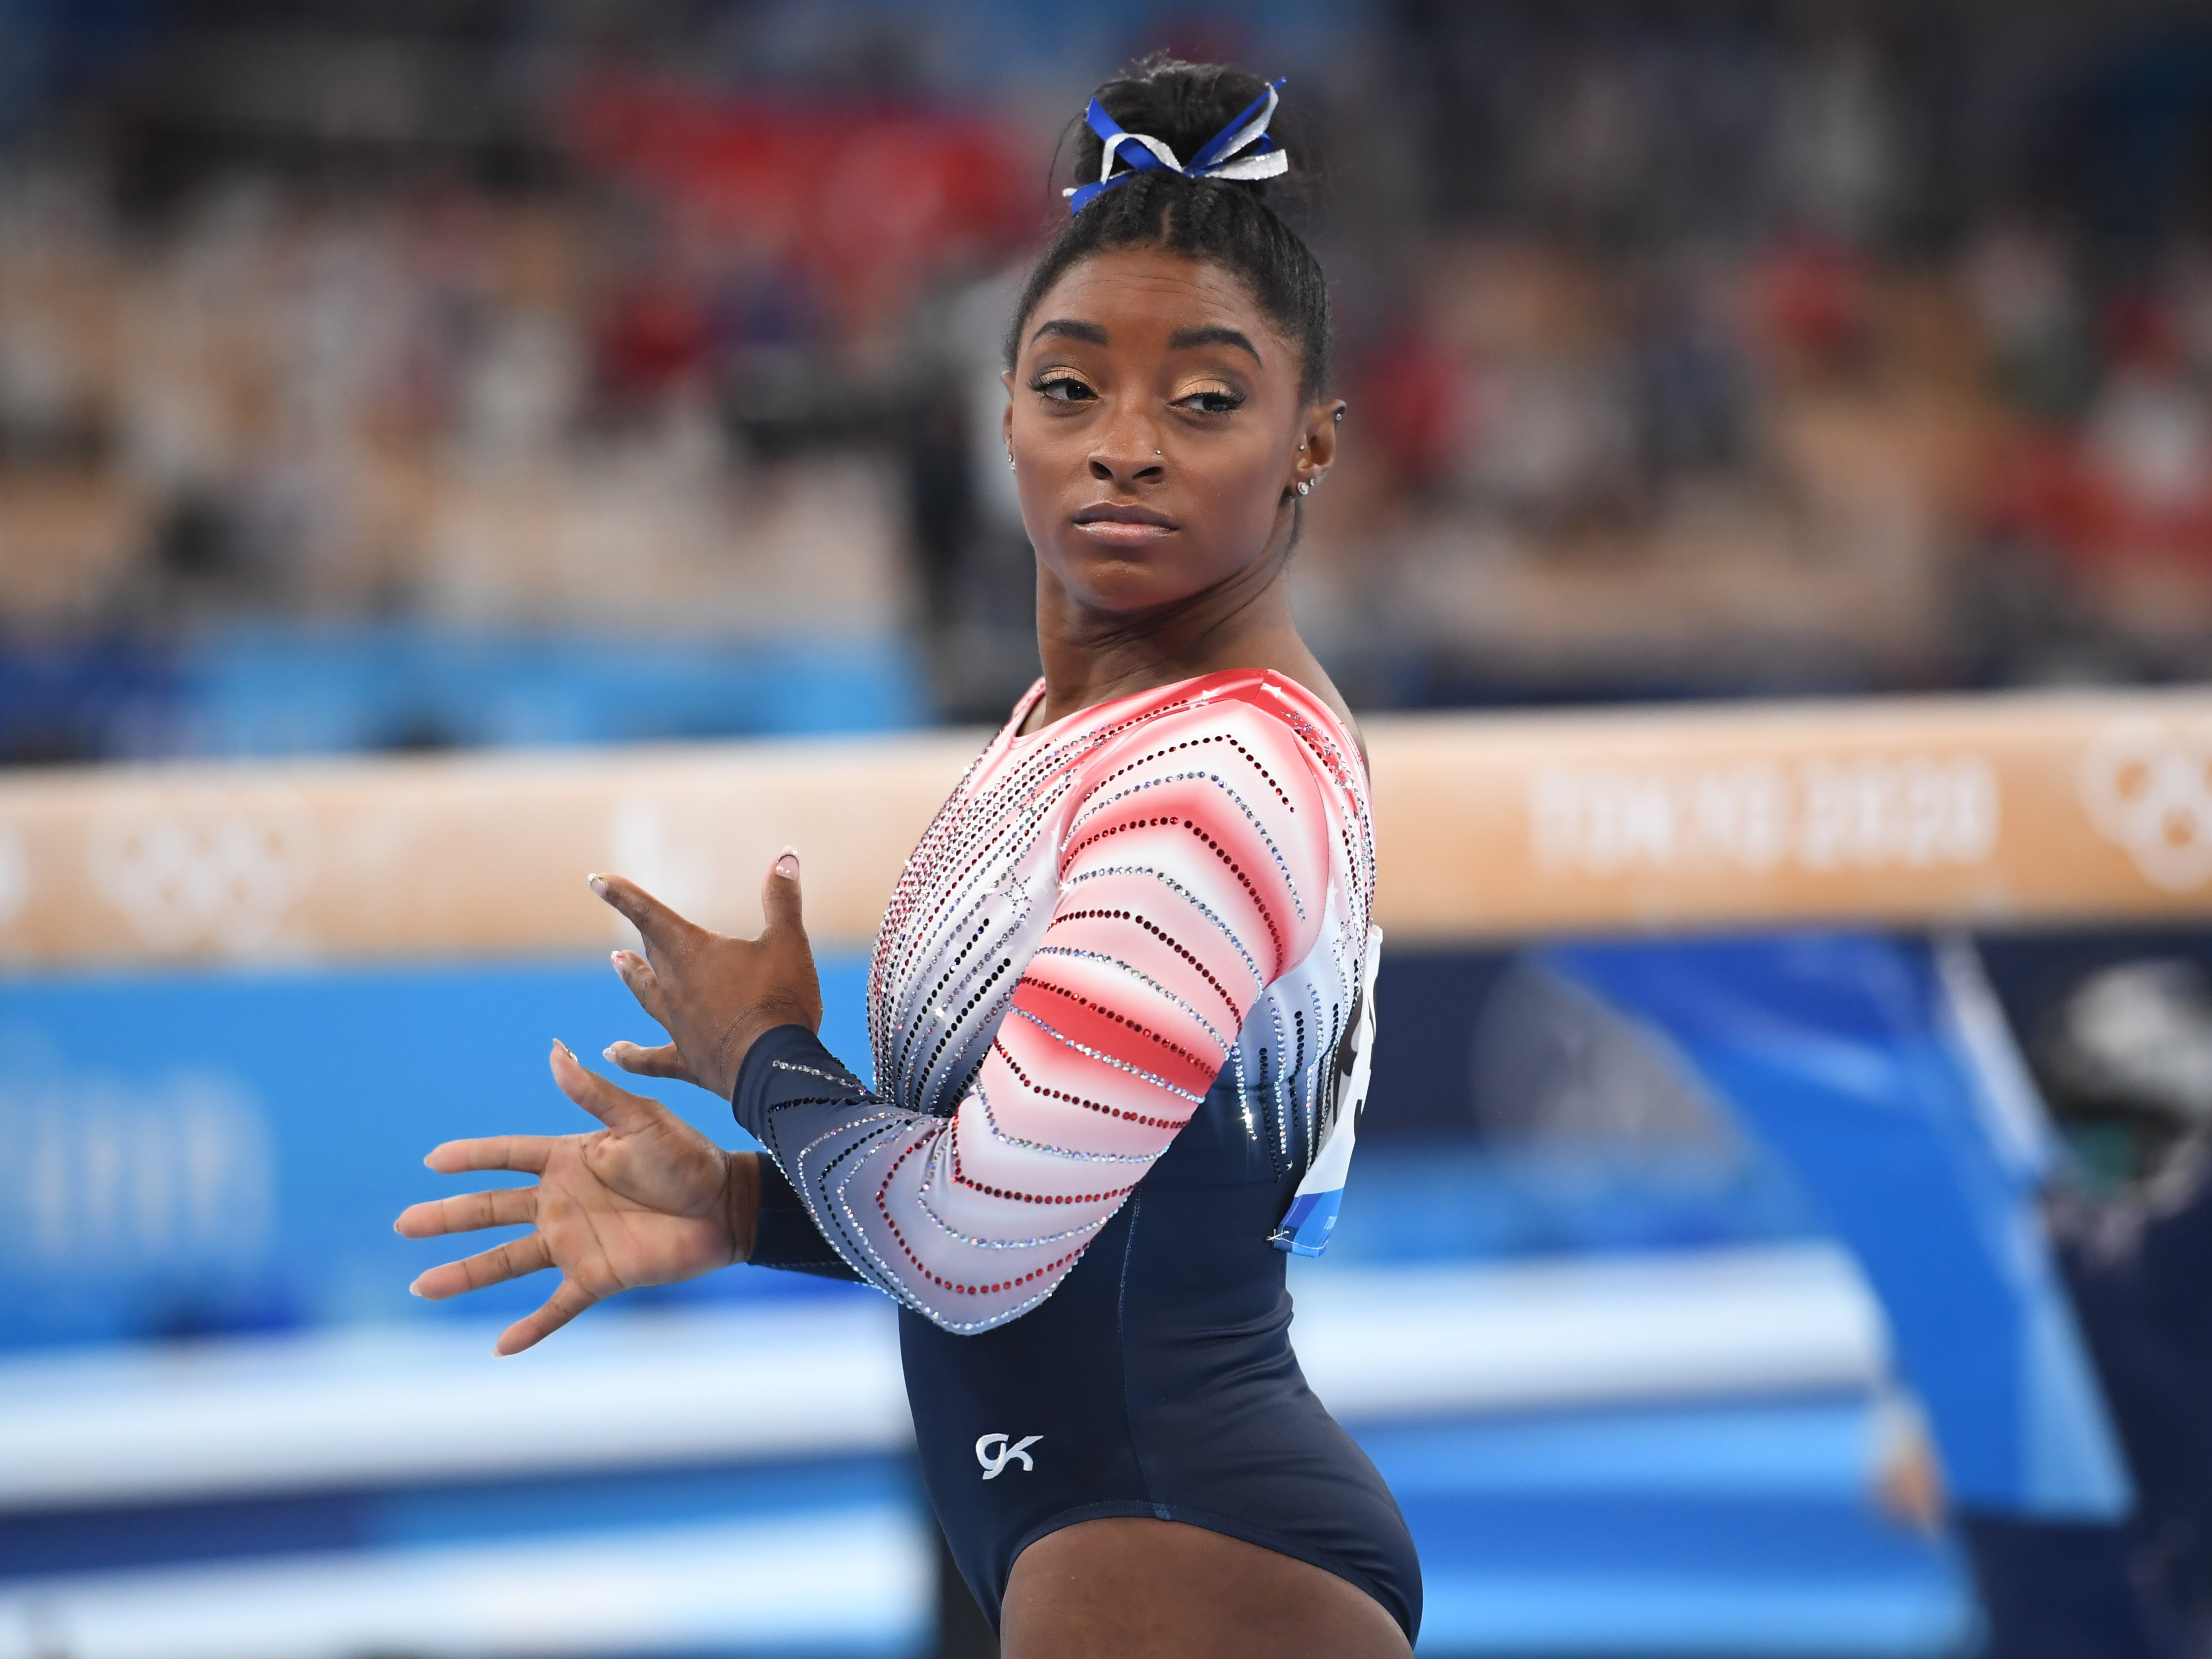 Simone Biles at the Tokyo Olympics on August 3, 2021. | Source: Getty Images